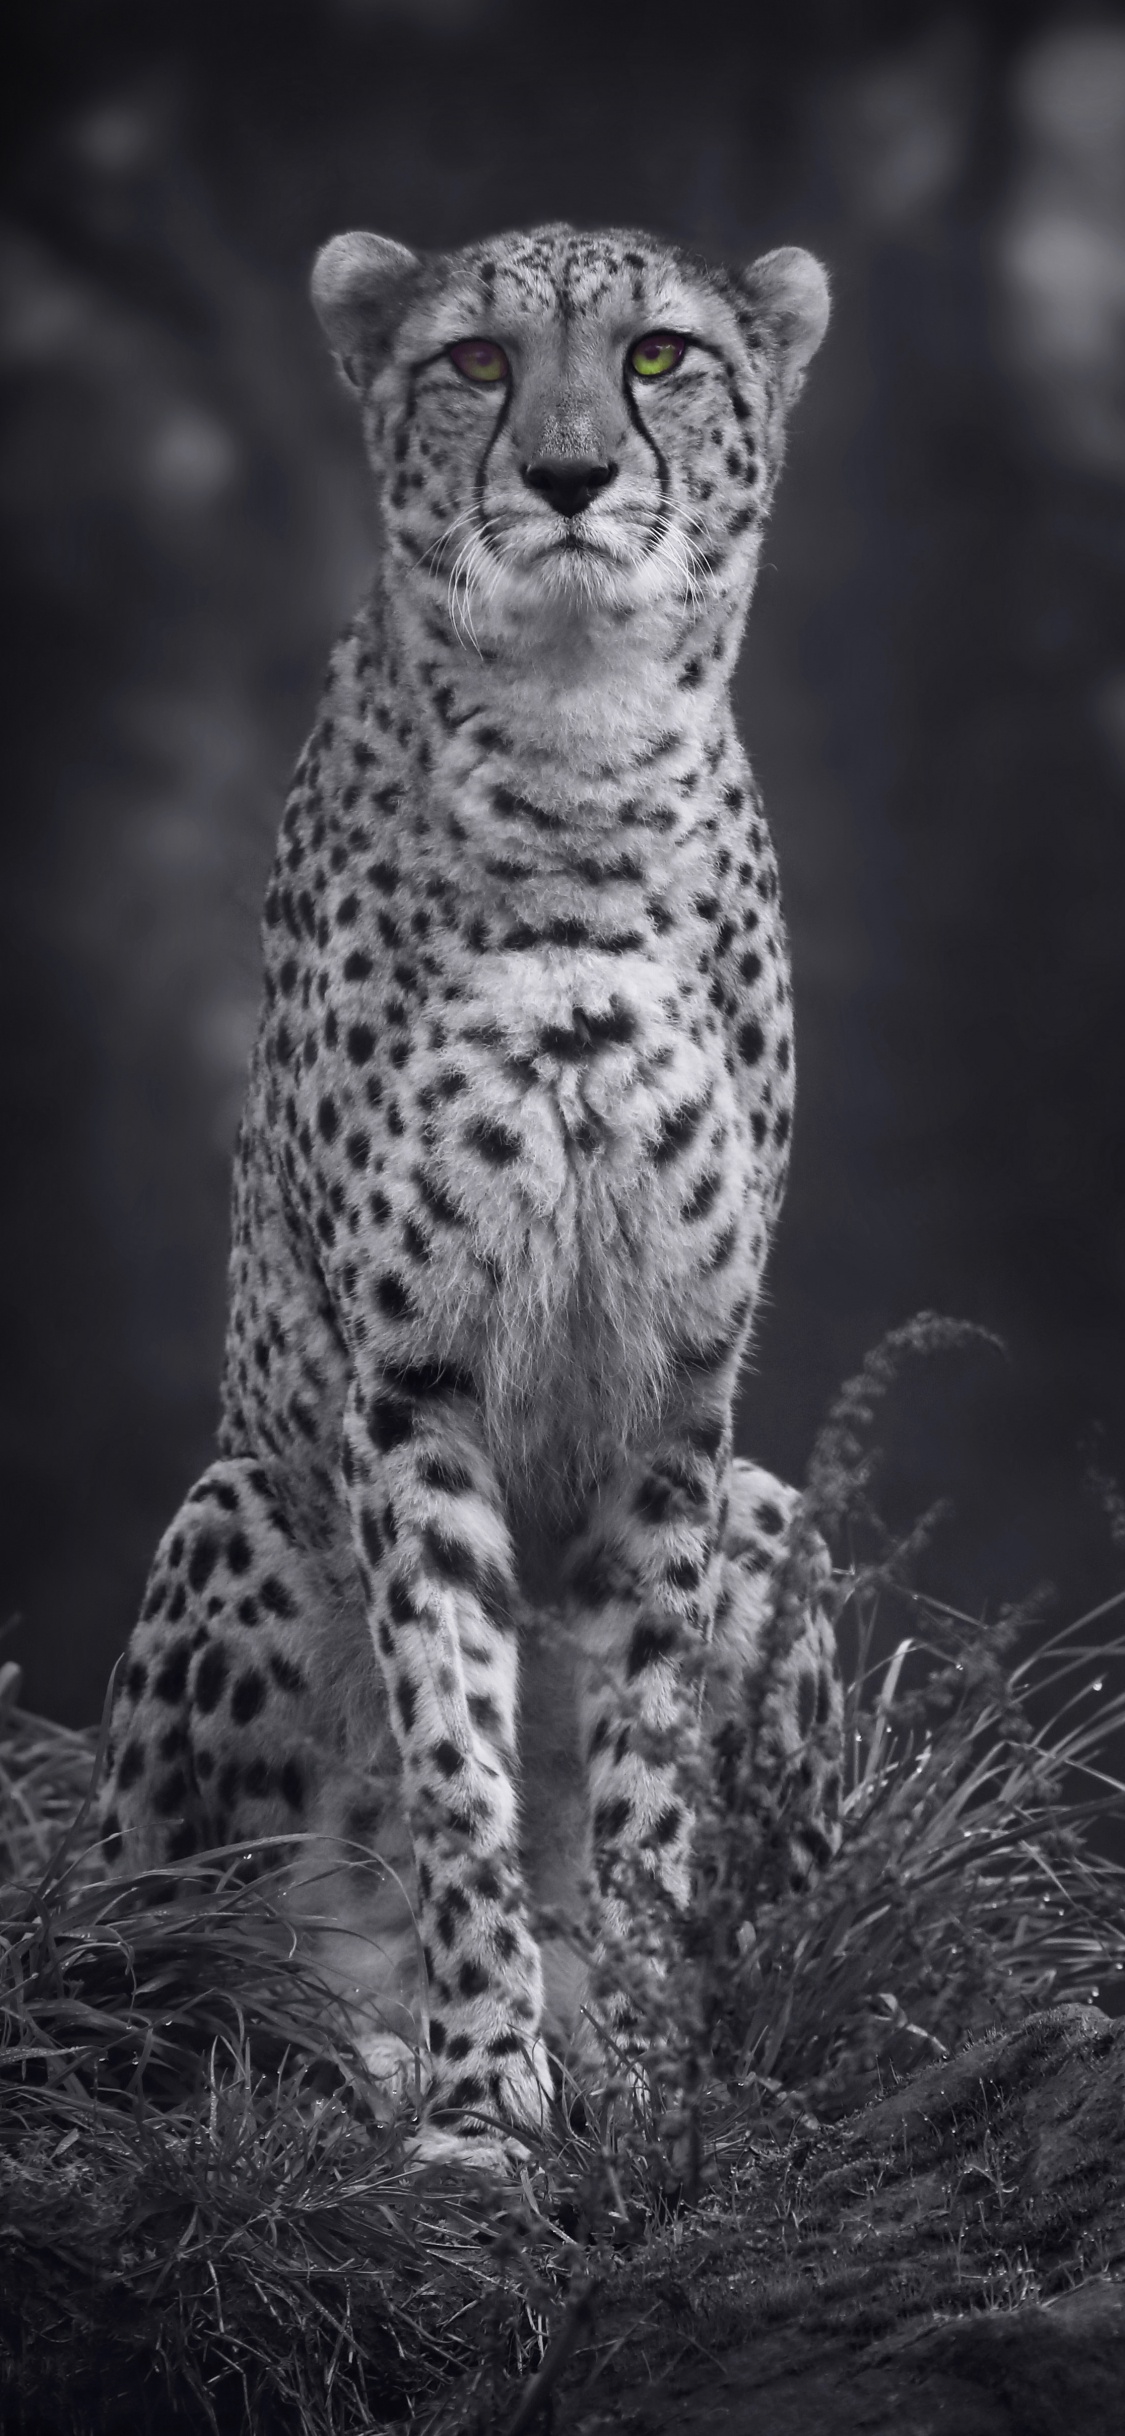 Grayscale Photo of Cheetah on Grass. Wallpaper in 1125x2436 Resolution